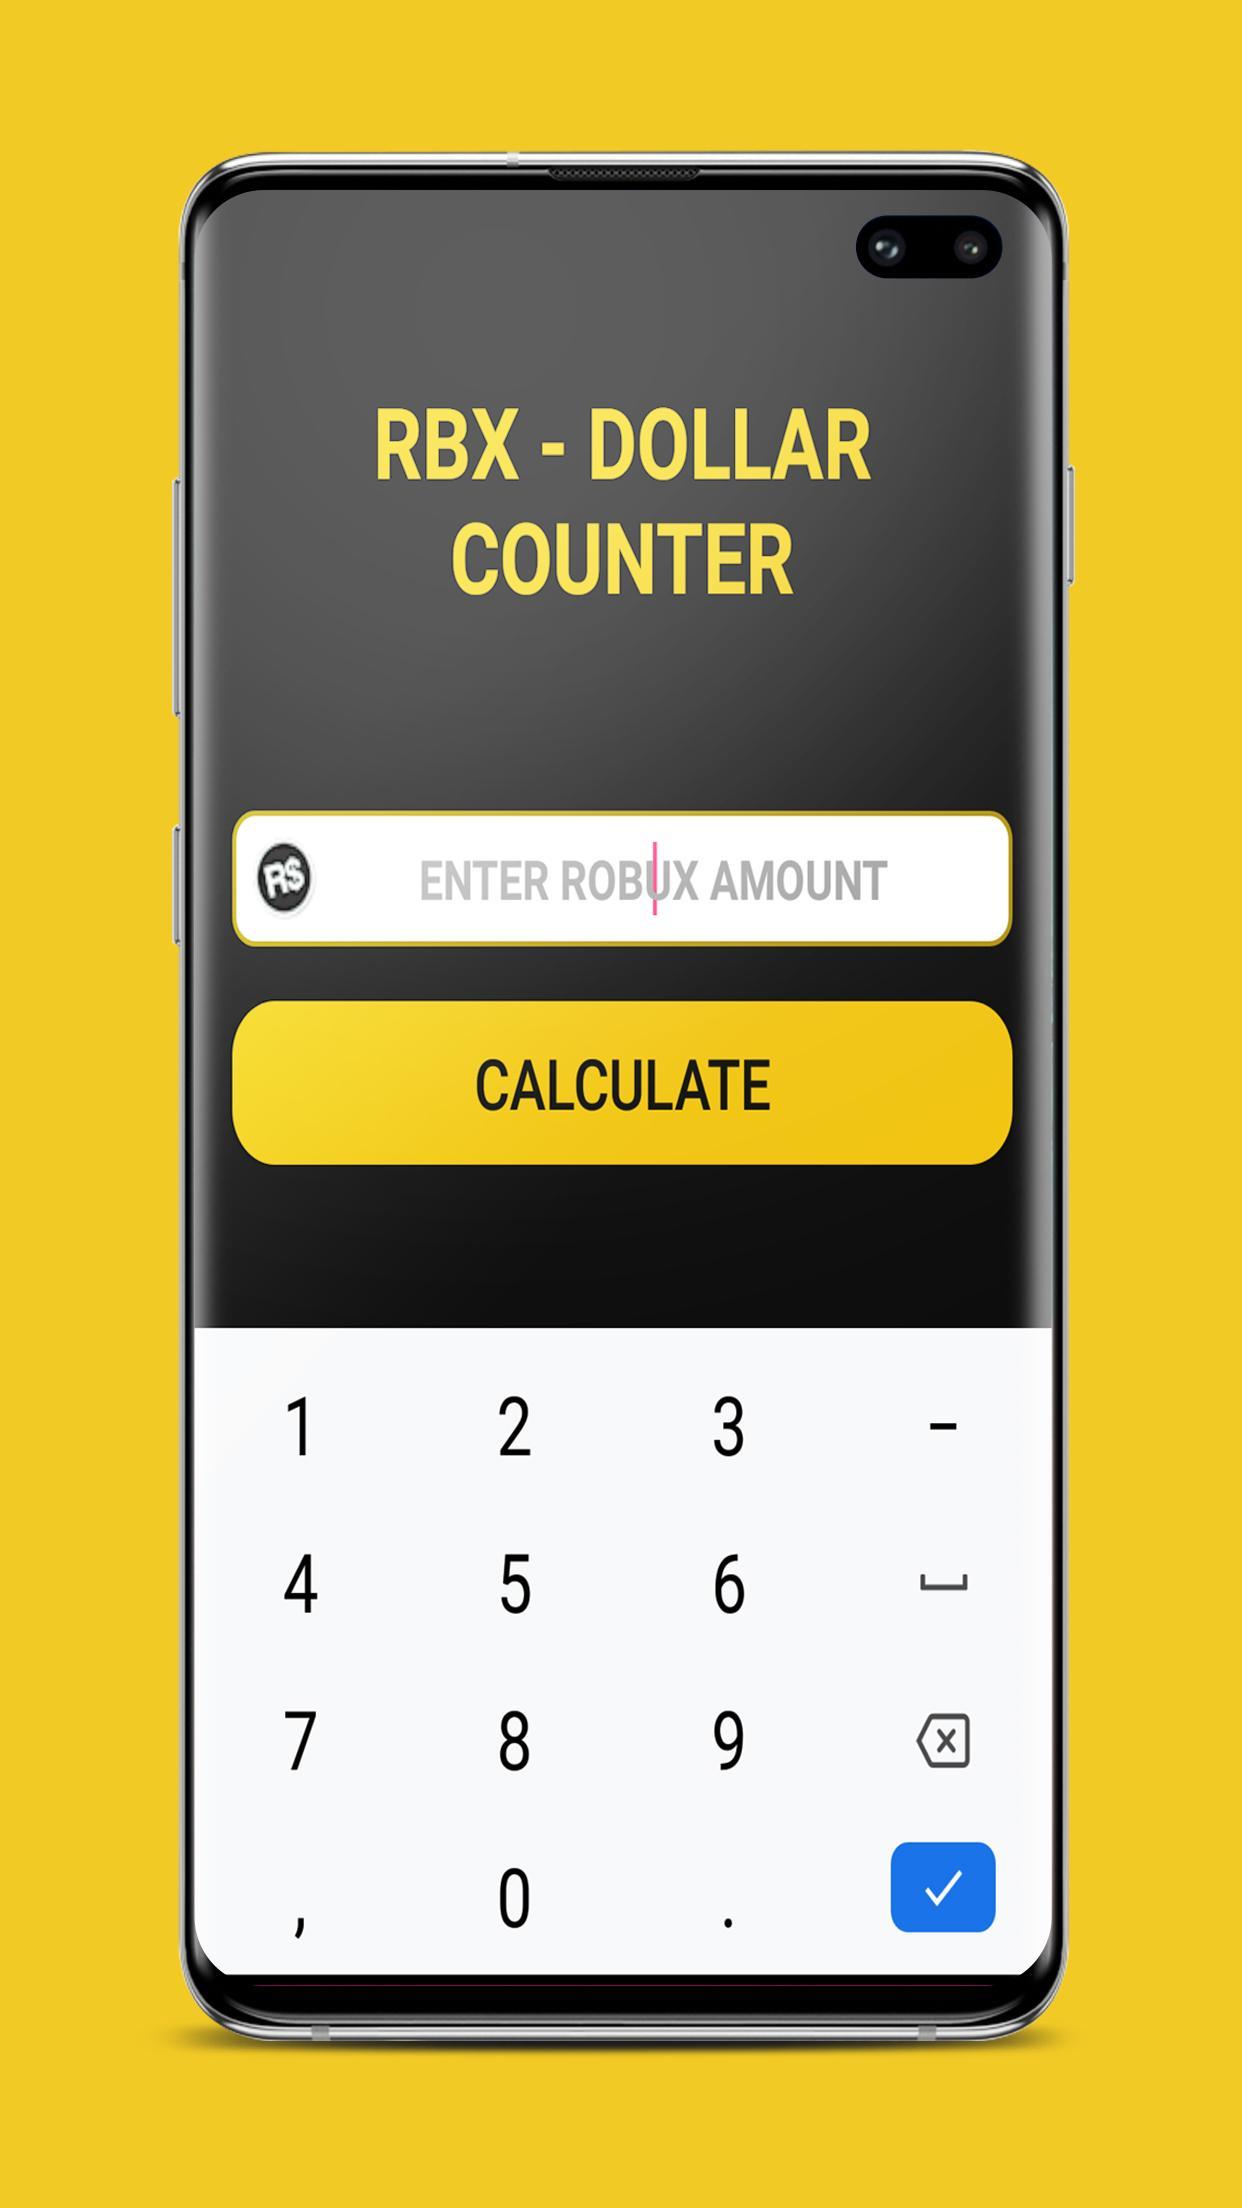 Free Robux Counter Rbx Calculator Conversion For Android - buying robux from rbx place roblox unblocked